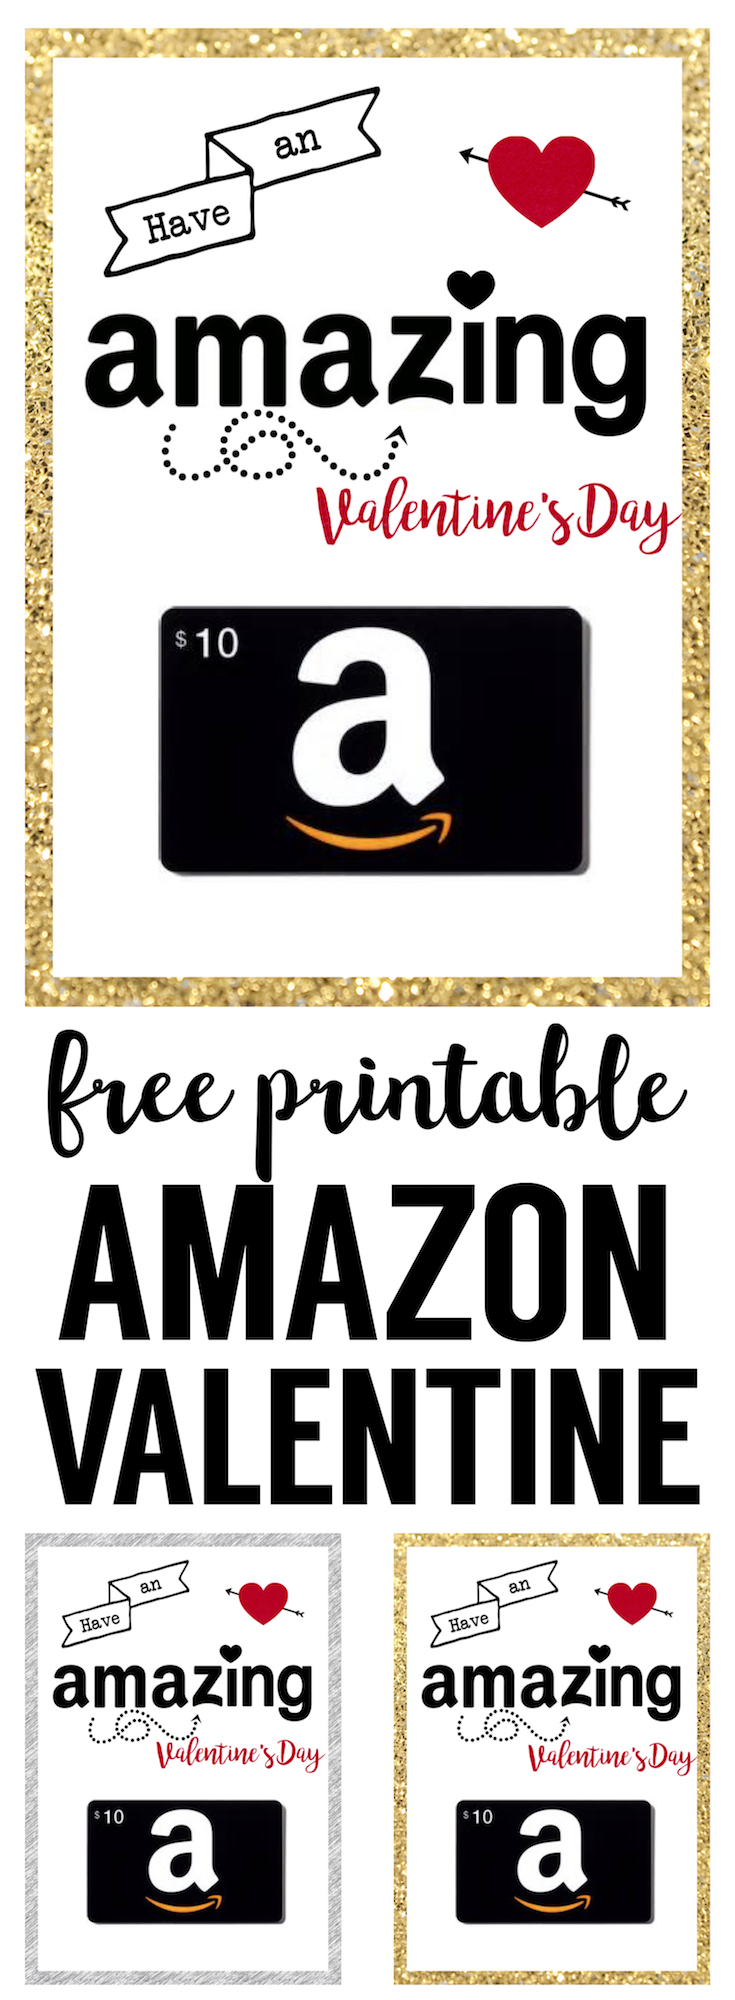 Amazon Valentine Card Printable. This printable amazon gift card valentine is the perfect DIY valentine card. Add a gift card to this free printable Valentine's day card and you are set. 